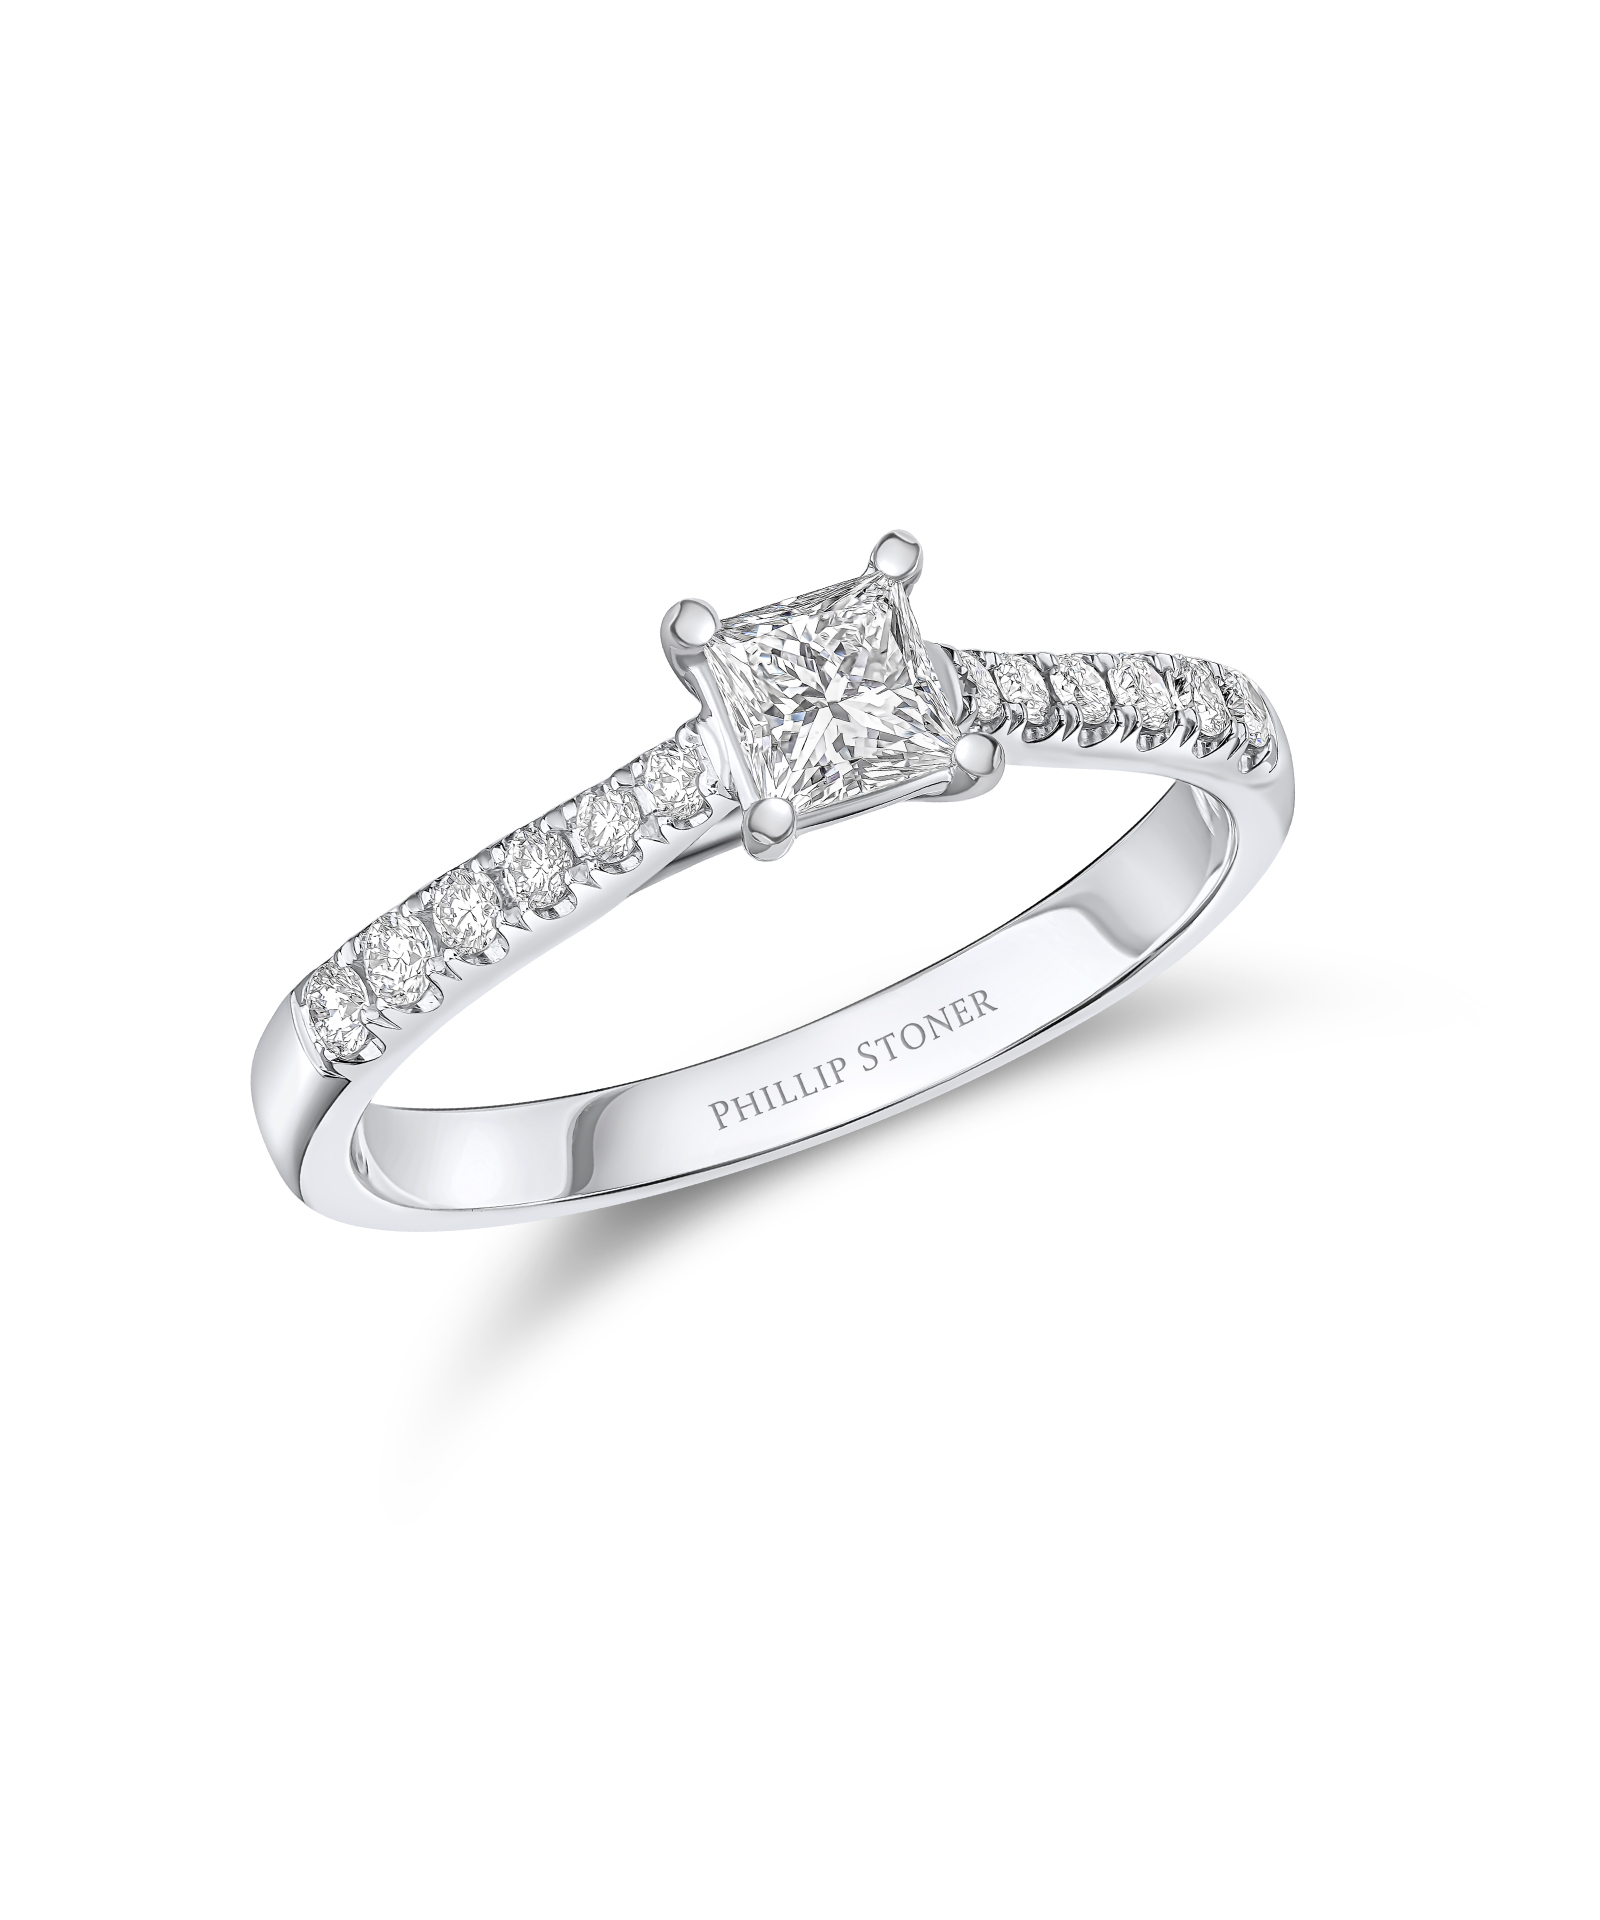 0.30ct Princess Cut Diamond Engagement Ring with Scallop Set Shoulders - Phillip Stoner The Jeweller